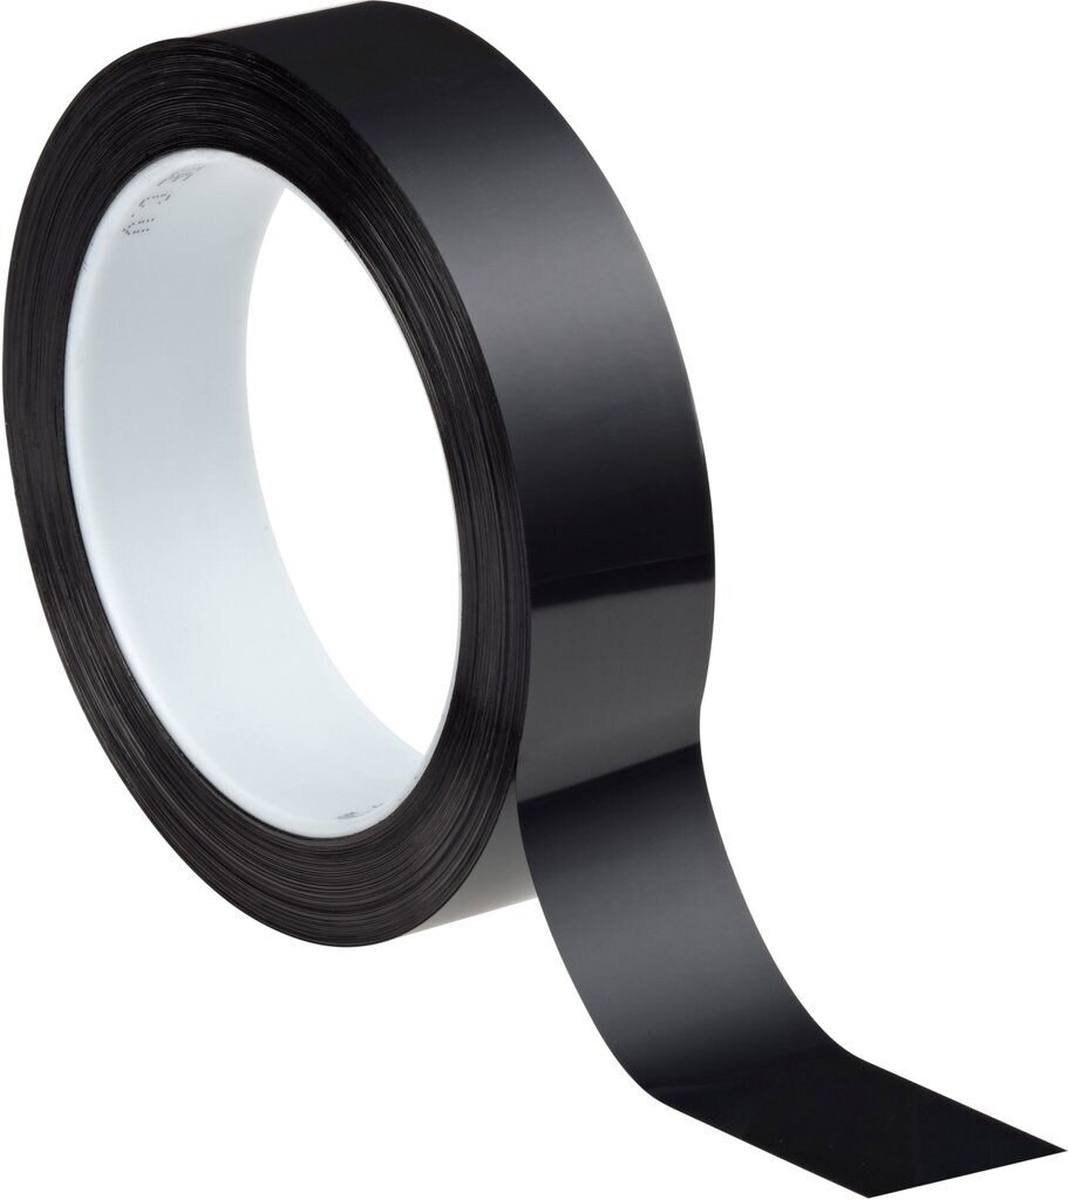 3M polyester adhesive tape 850 T, transparent, 19 mm x 66 m, 0.05 mm